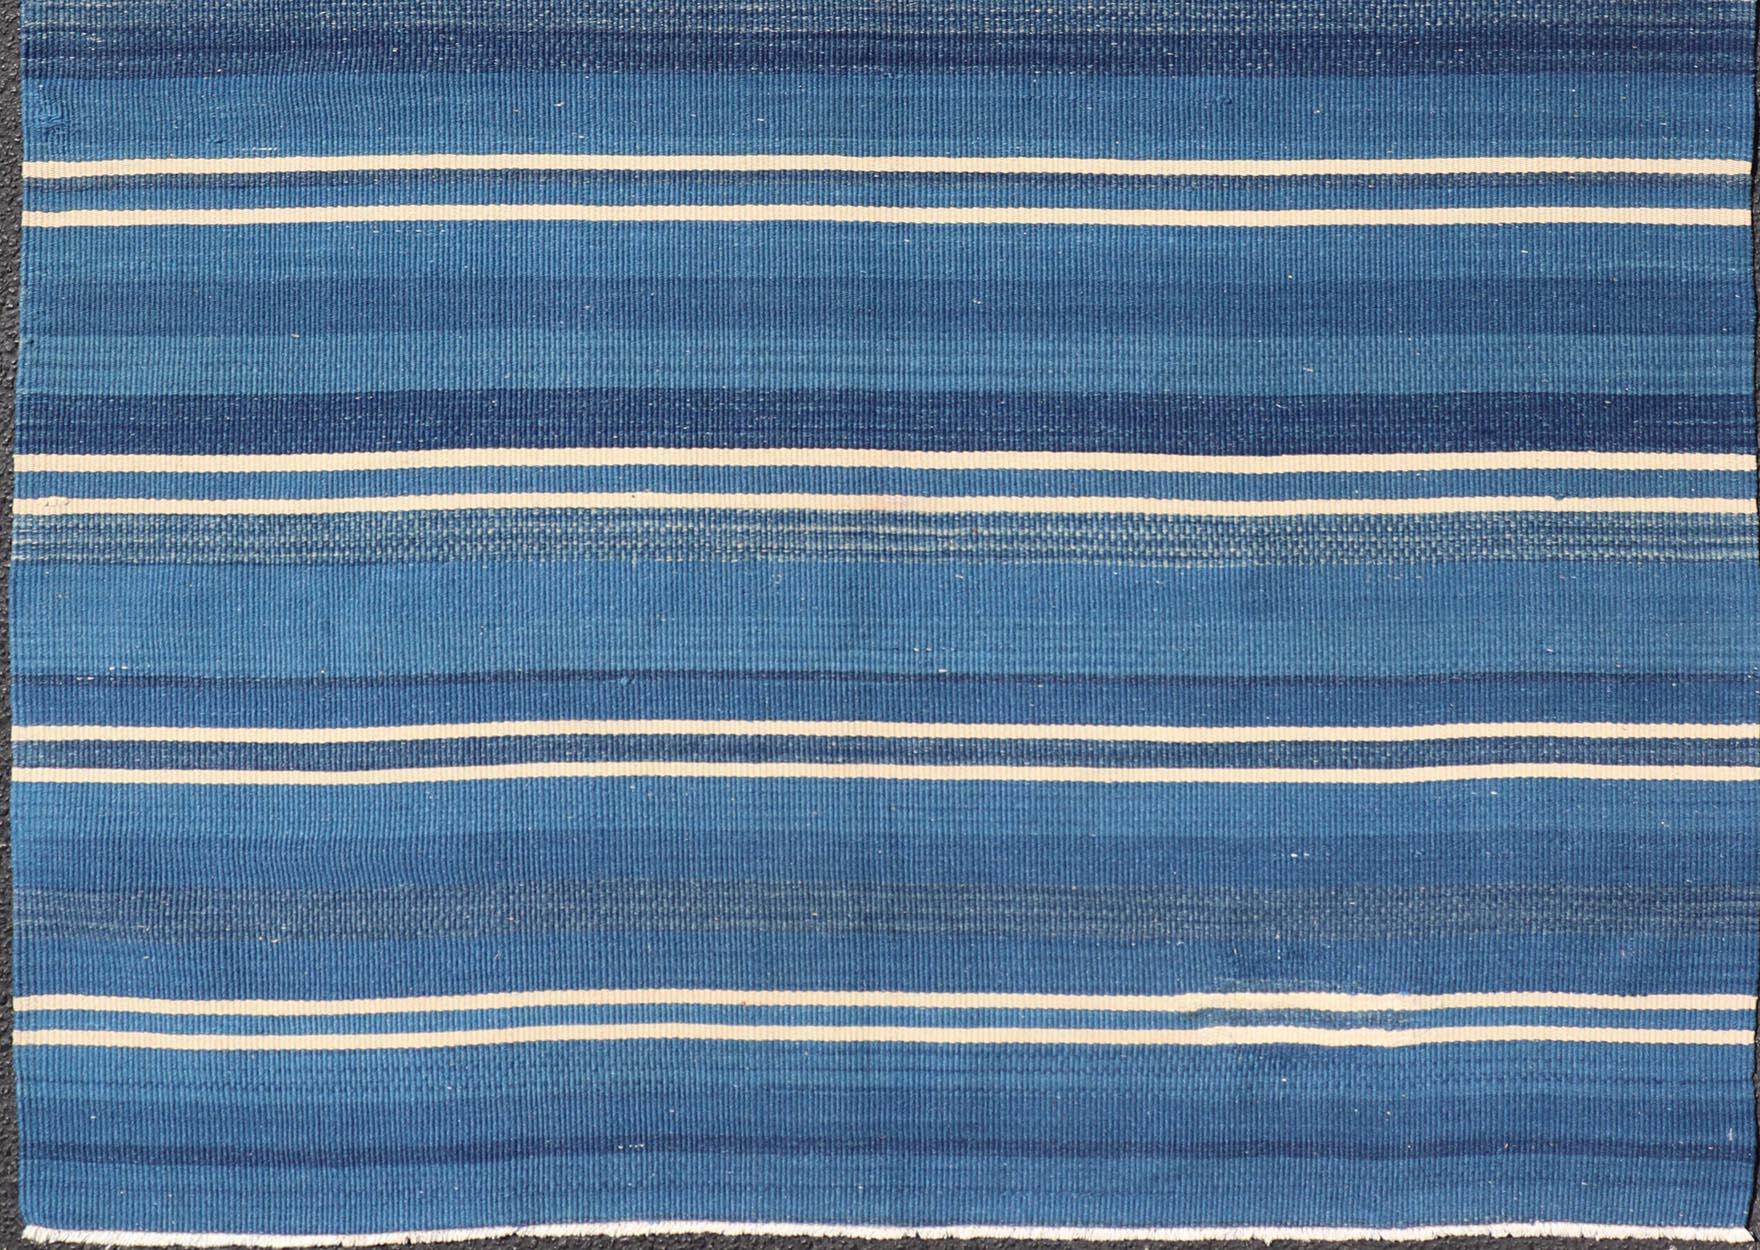 Turkish Flat-Weave Kilim in Navy Blue and Ivory in Striped Design For Sale 2